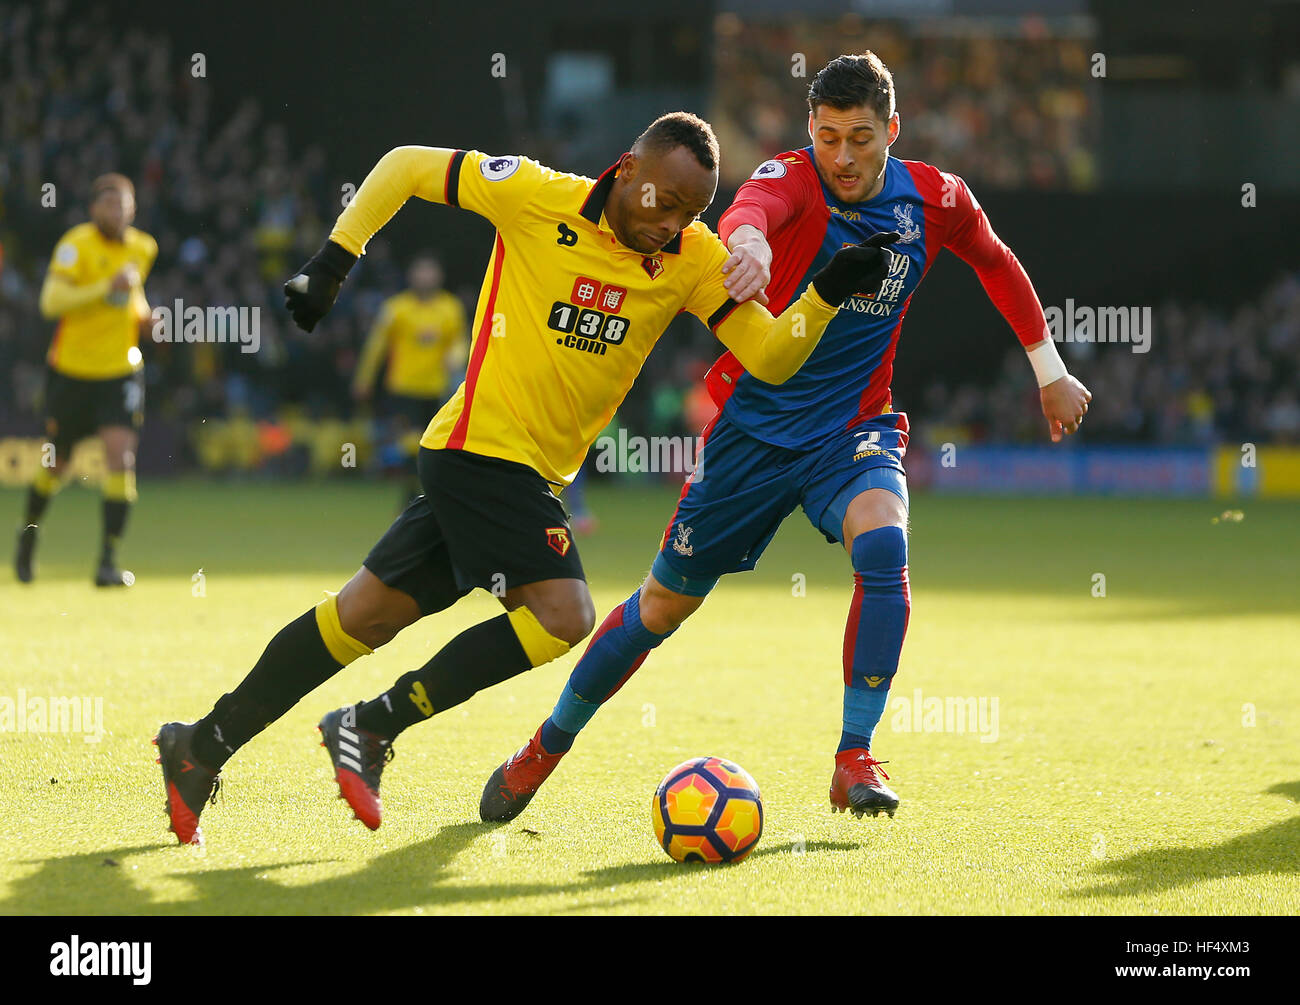 Watford's Juan Camilo Zuniga (left) and Crystal Palace's Joel Ward (right) battle for the ball during the Premier League match at Vicarage Road, Watford. Stock Photo